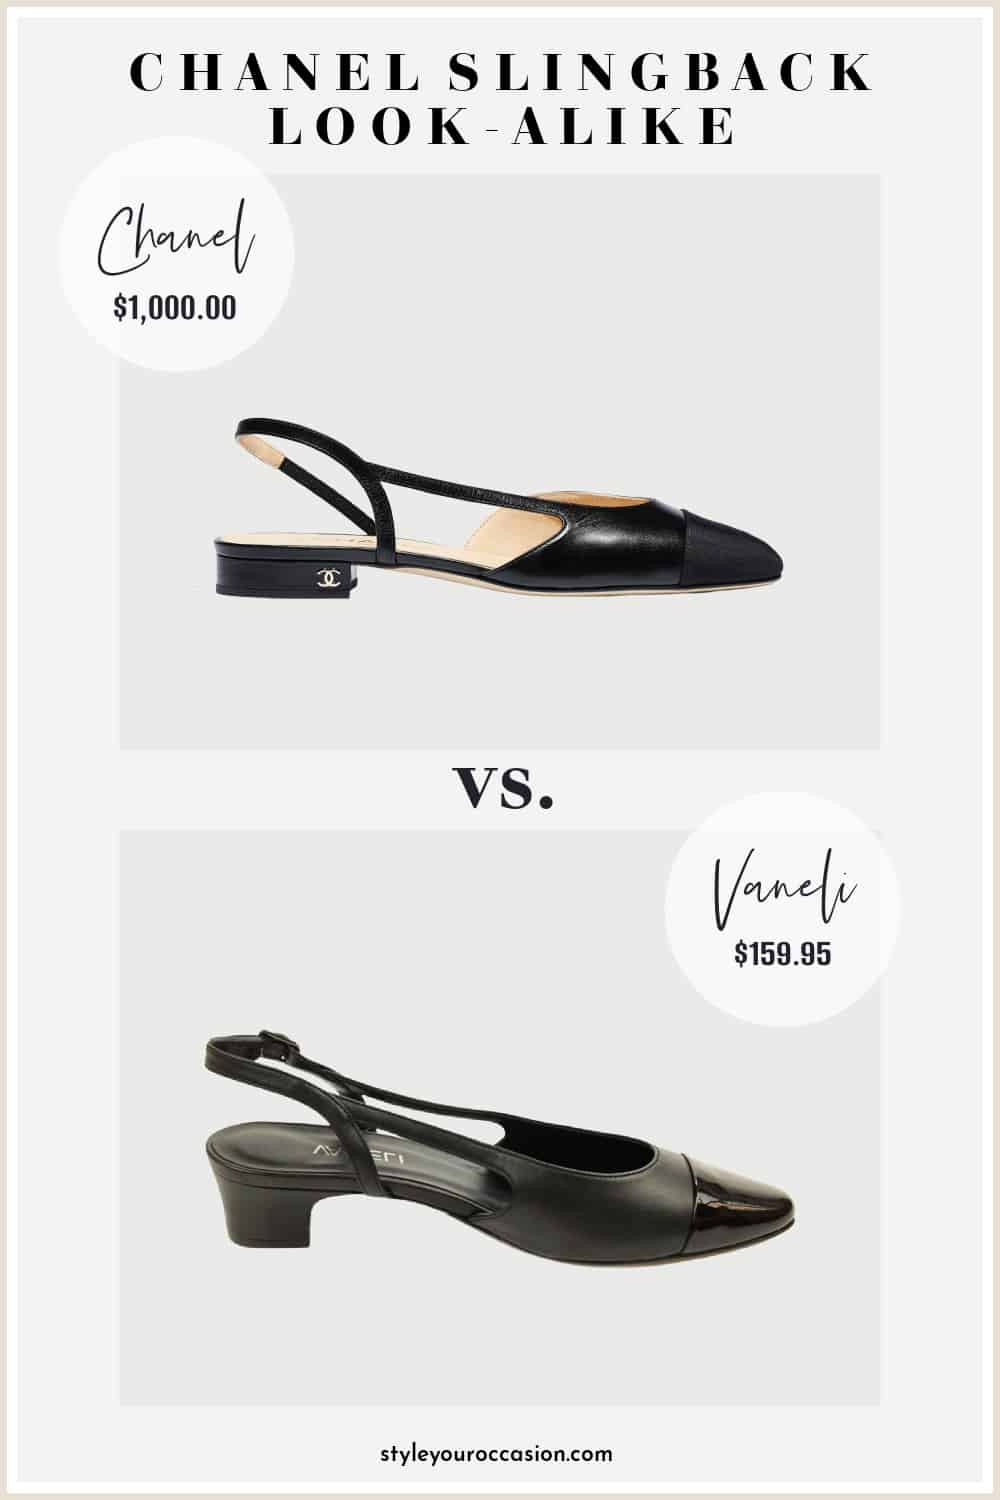 Chanel Slingback Dupe: 9+ Stunning Look-alikes For Less in 2023!